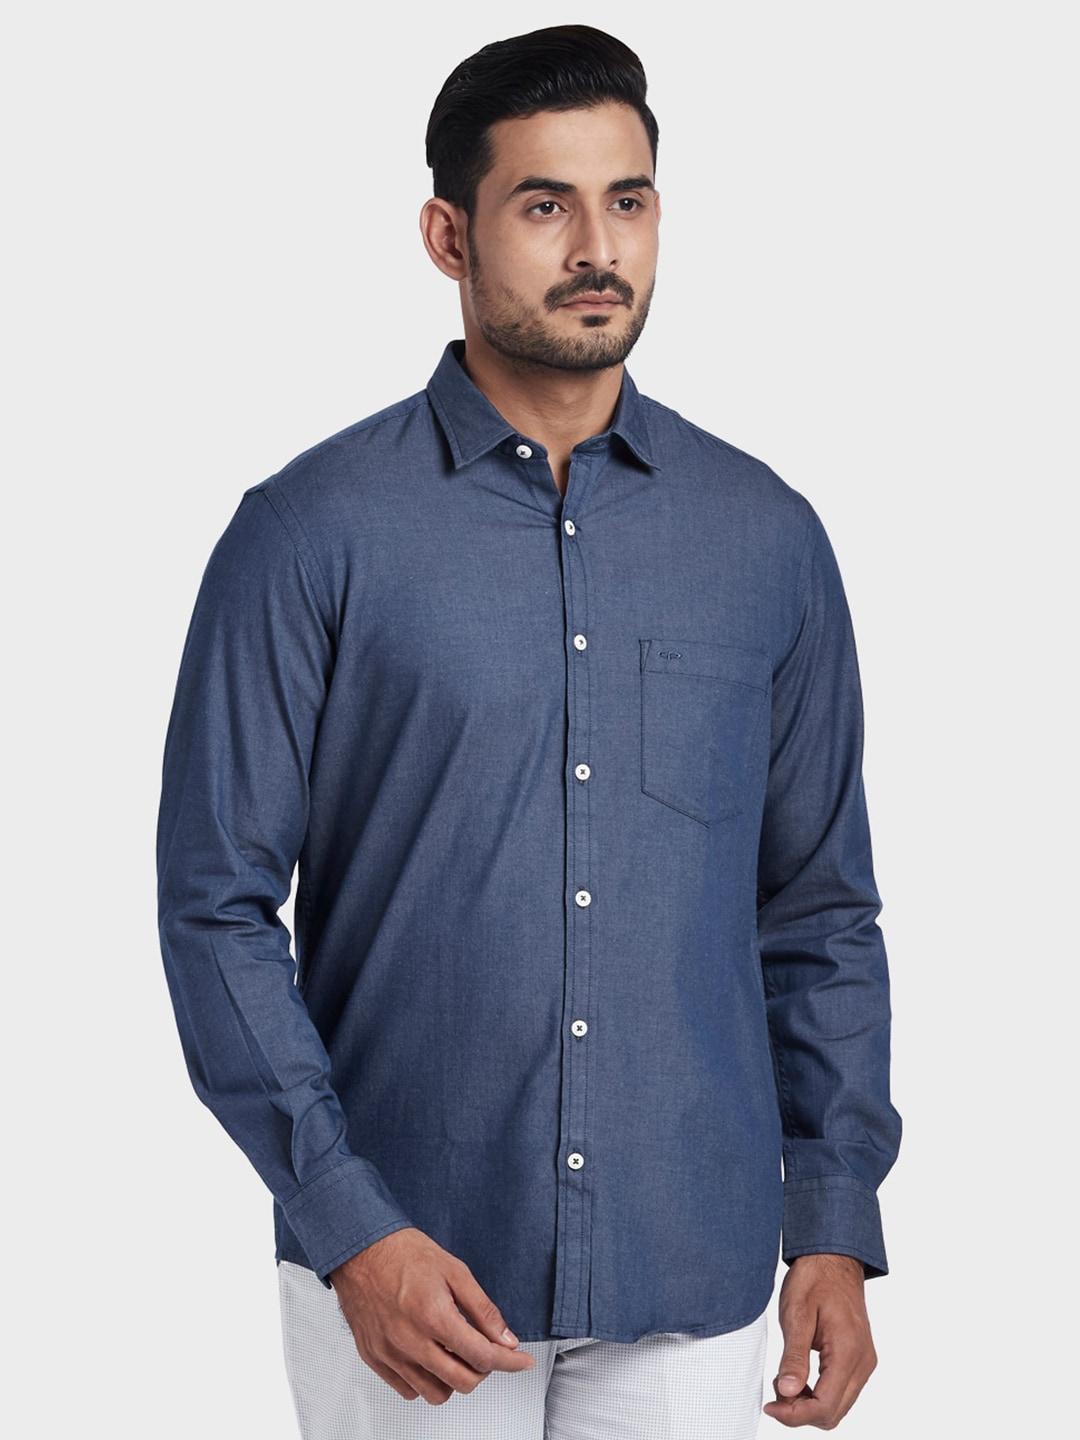 colorplus-men-blue-solid-tailored-fit-casual-shirt